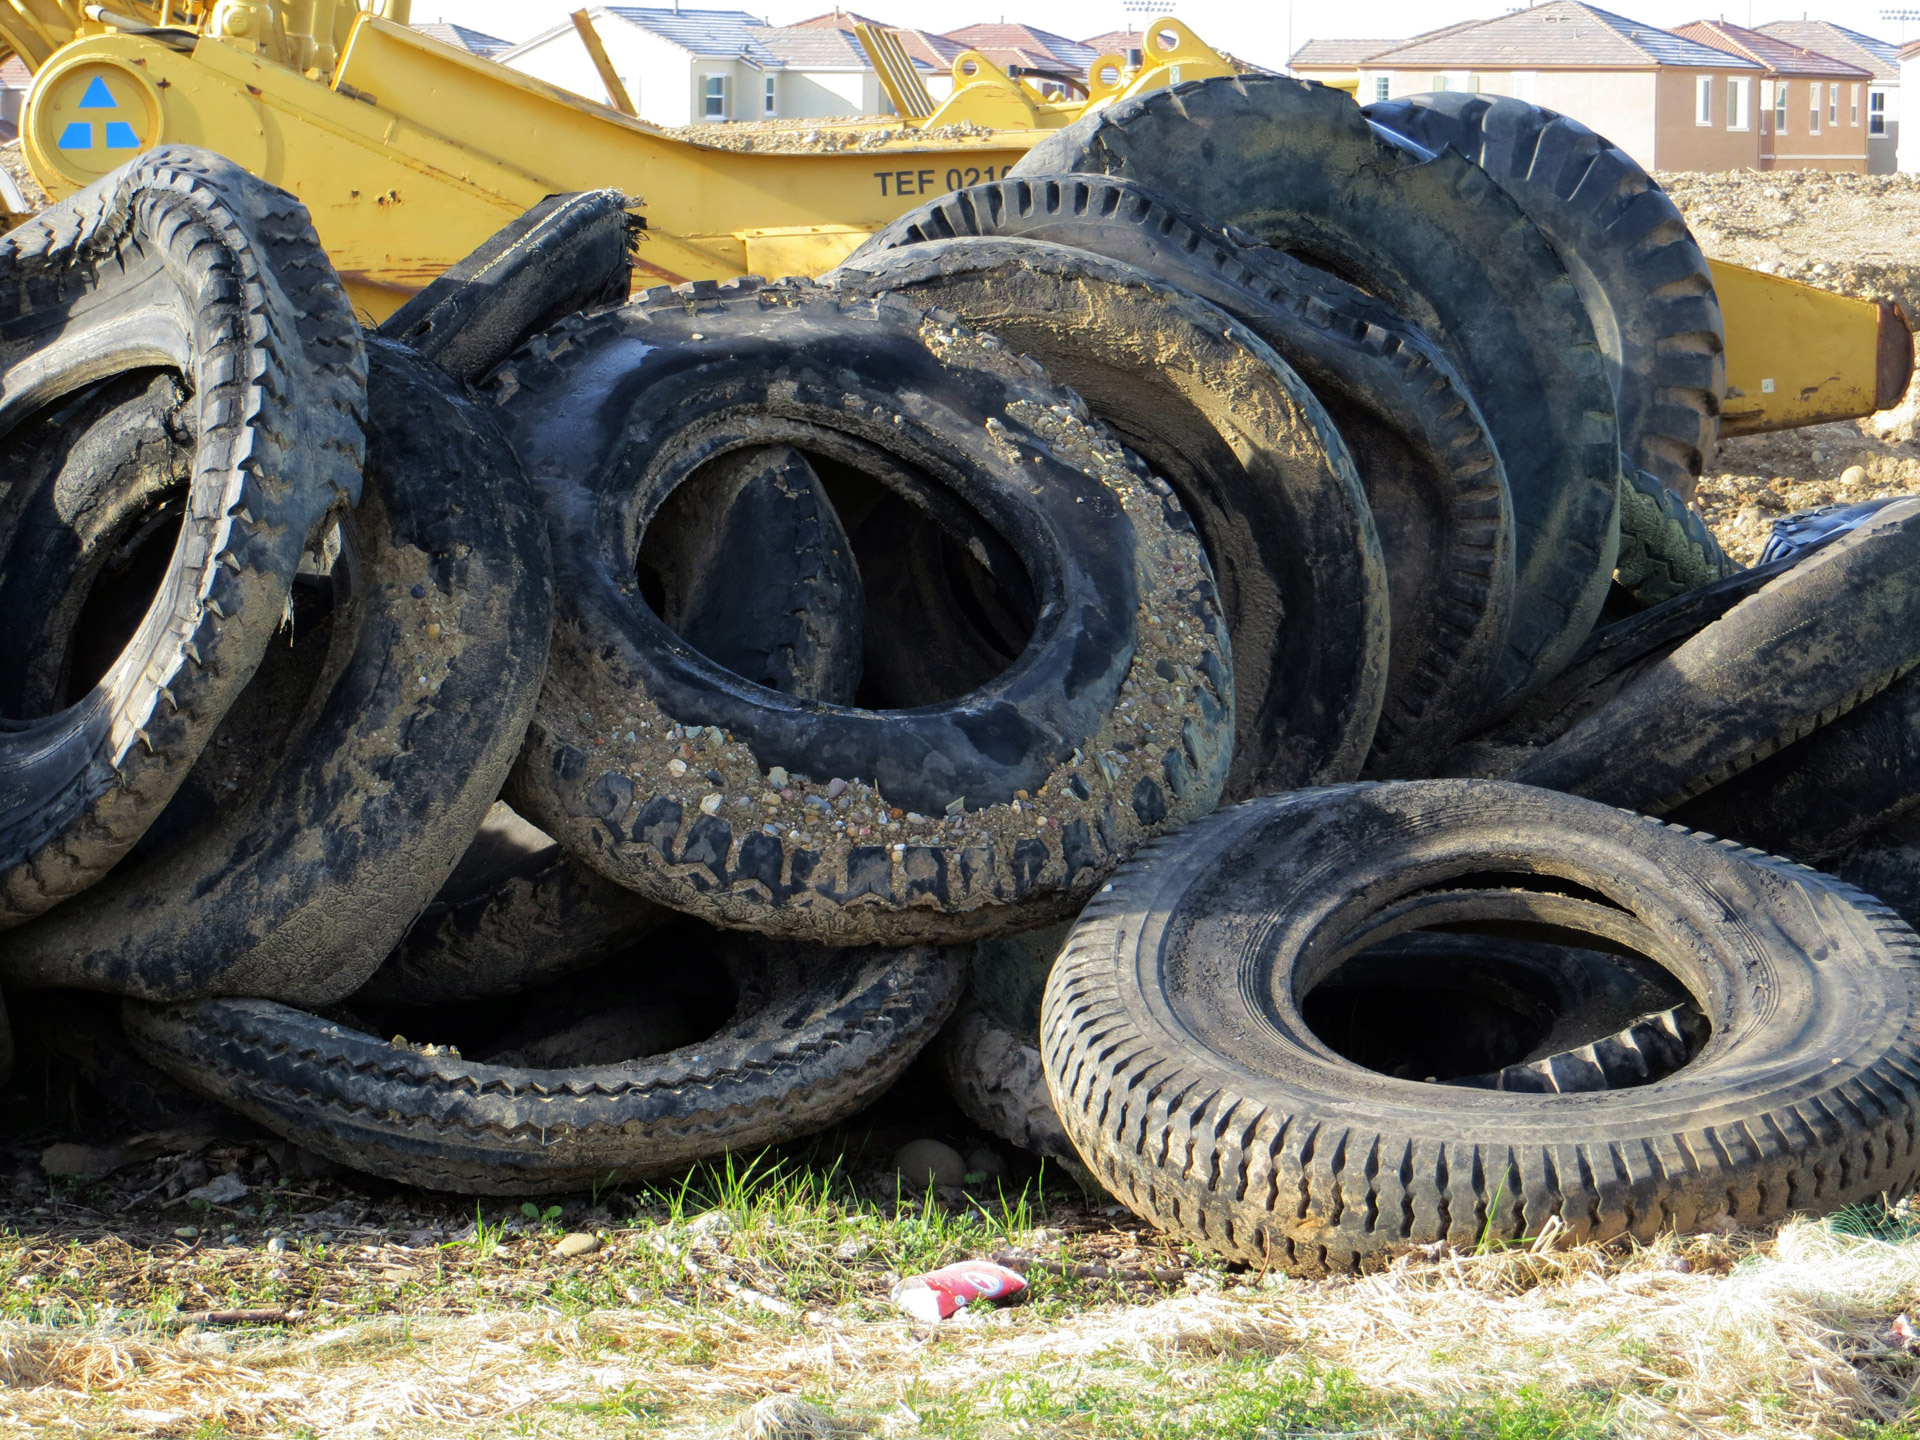 Old Tires 575 Free Stock Photo - Public Domain Pictures